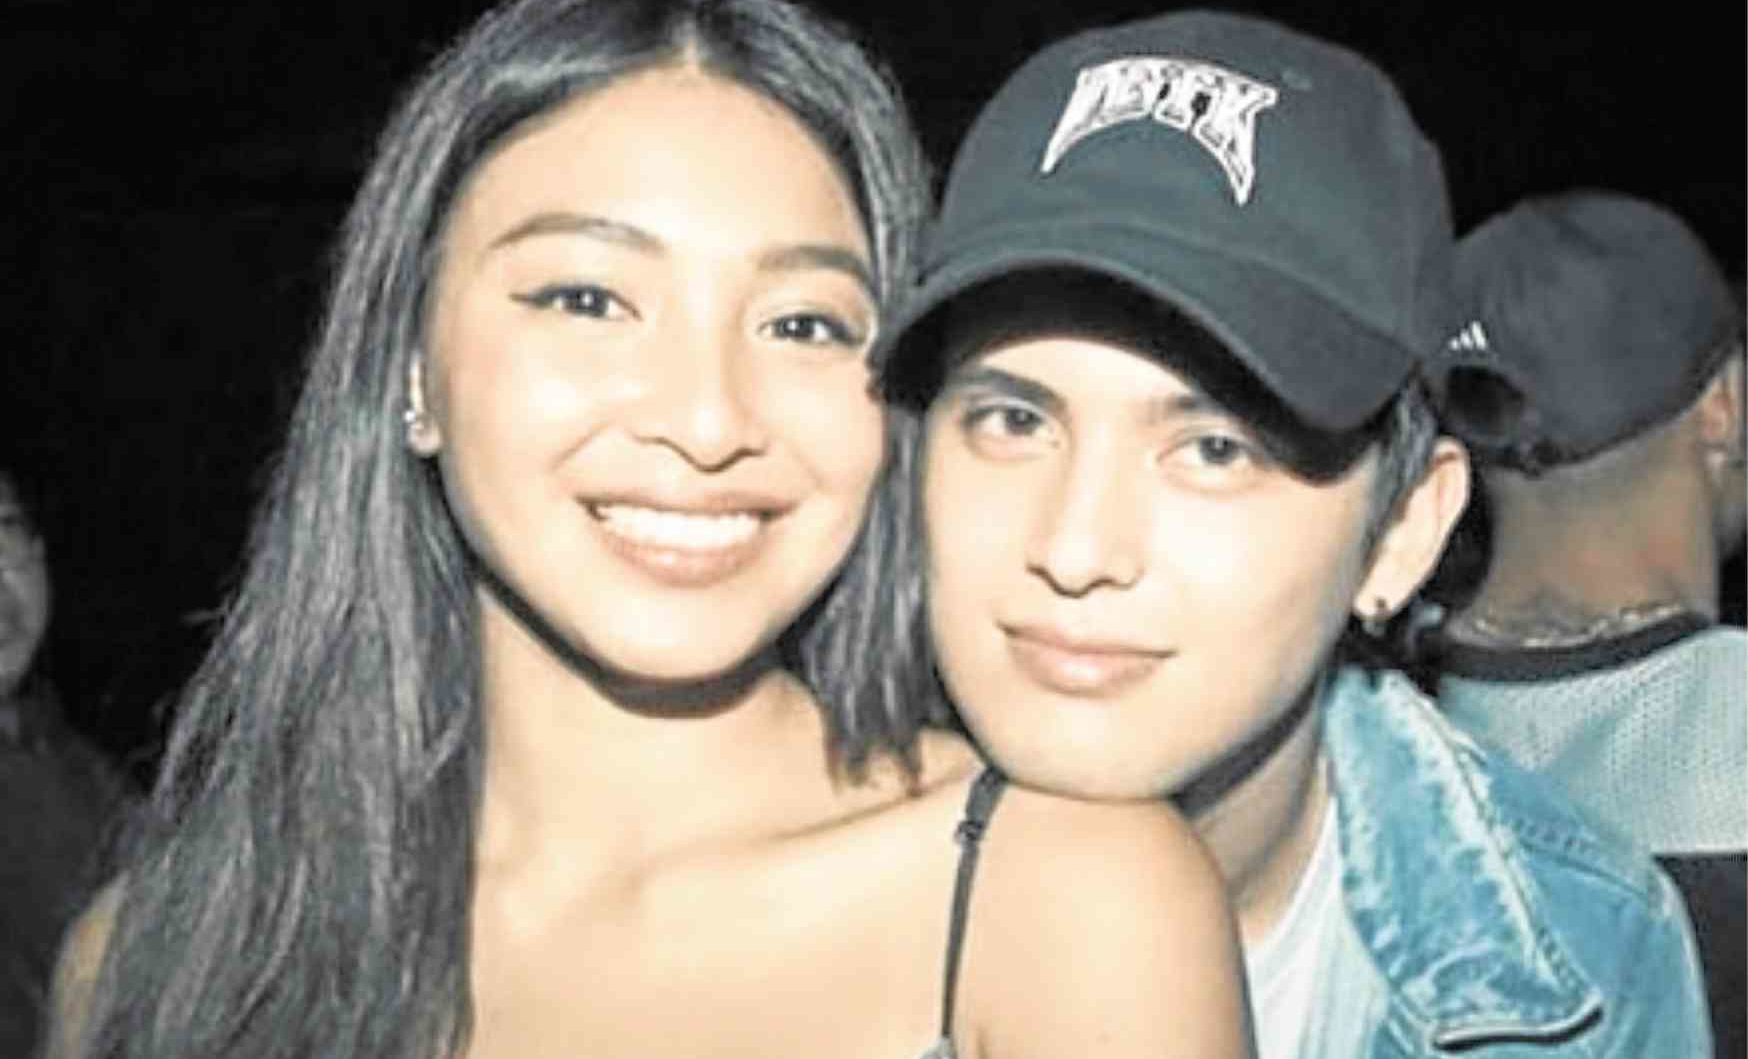 Will James’ ‘slip of the tongue’ affect JaDine’s endorsements?